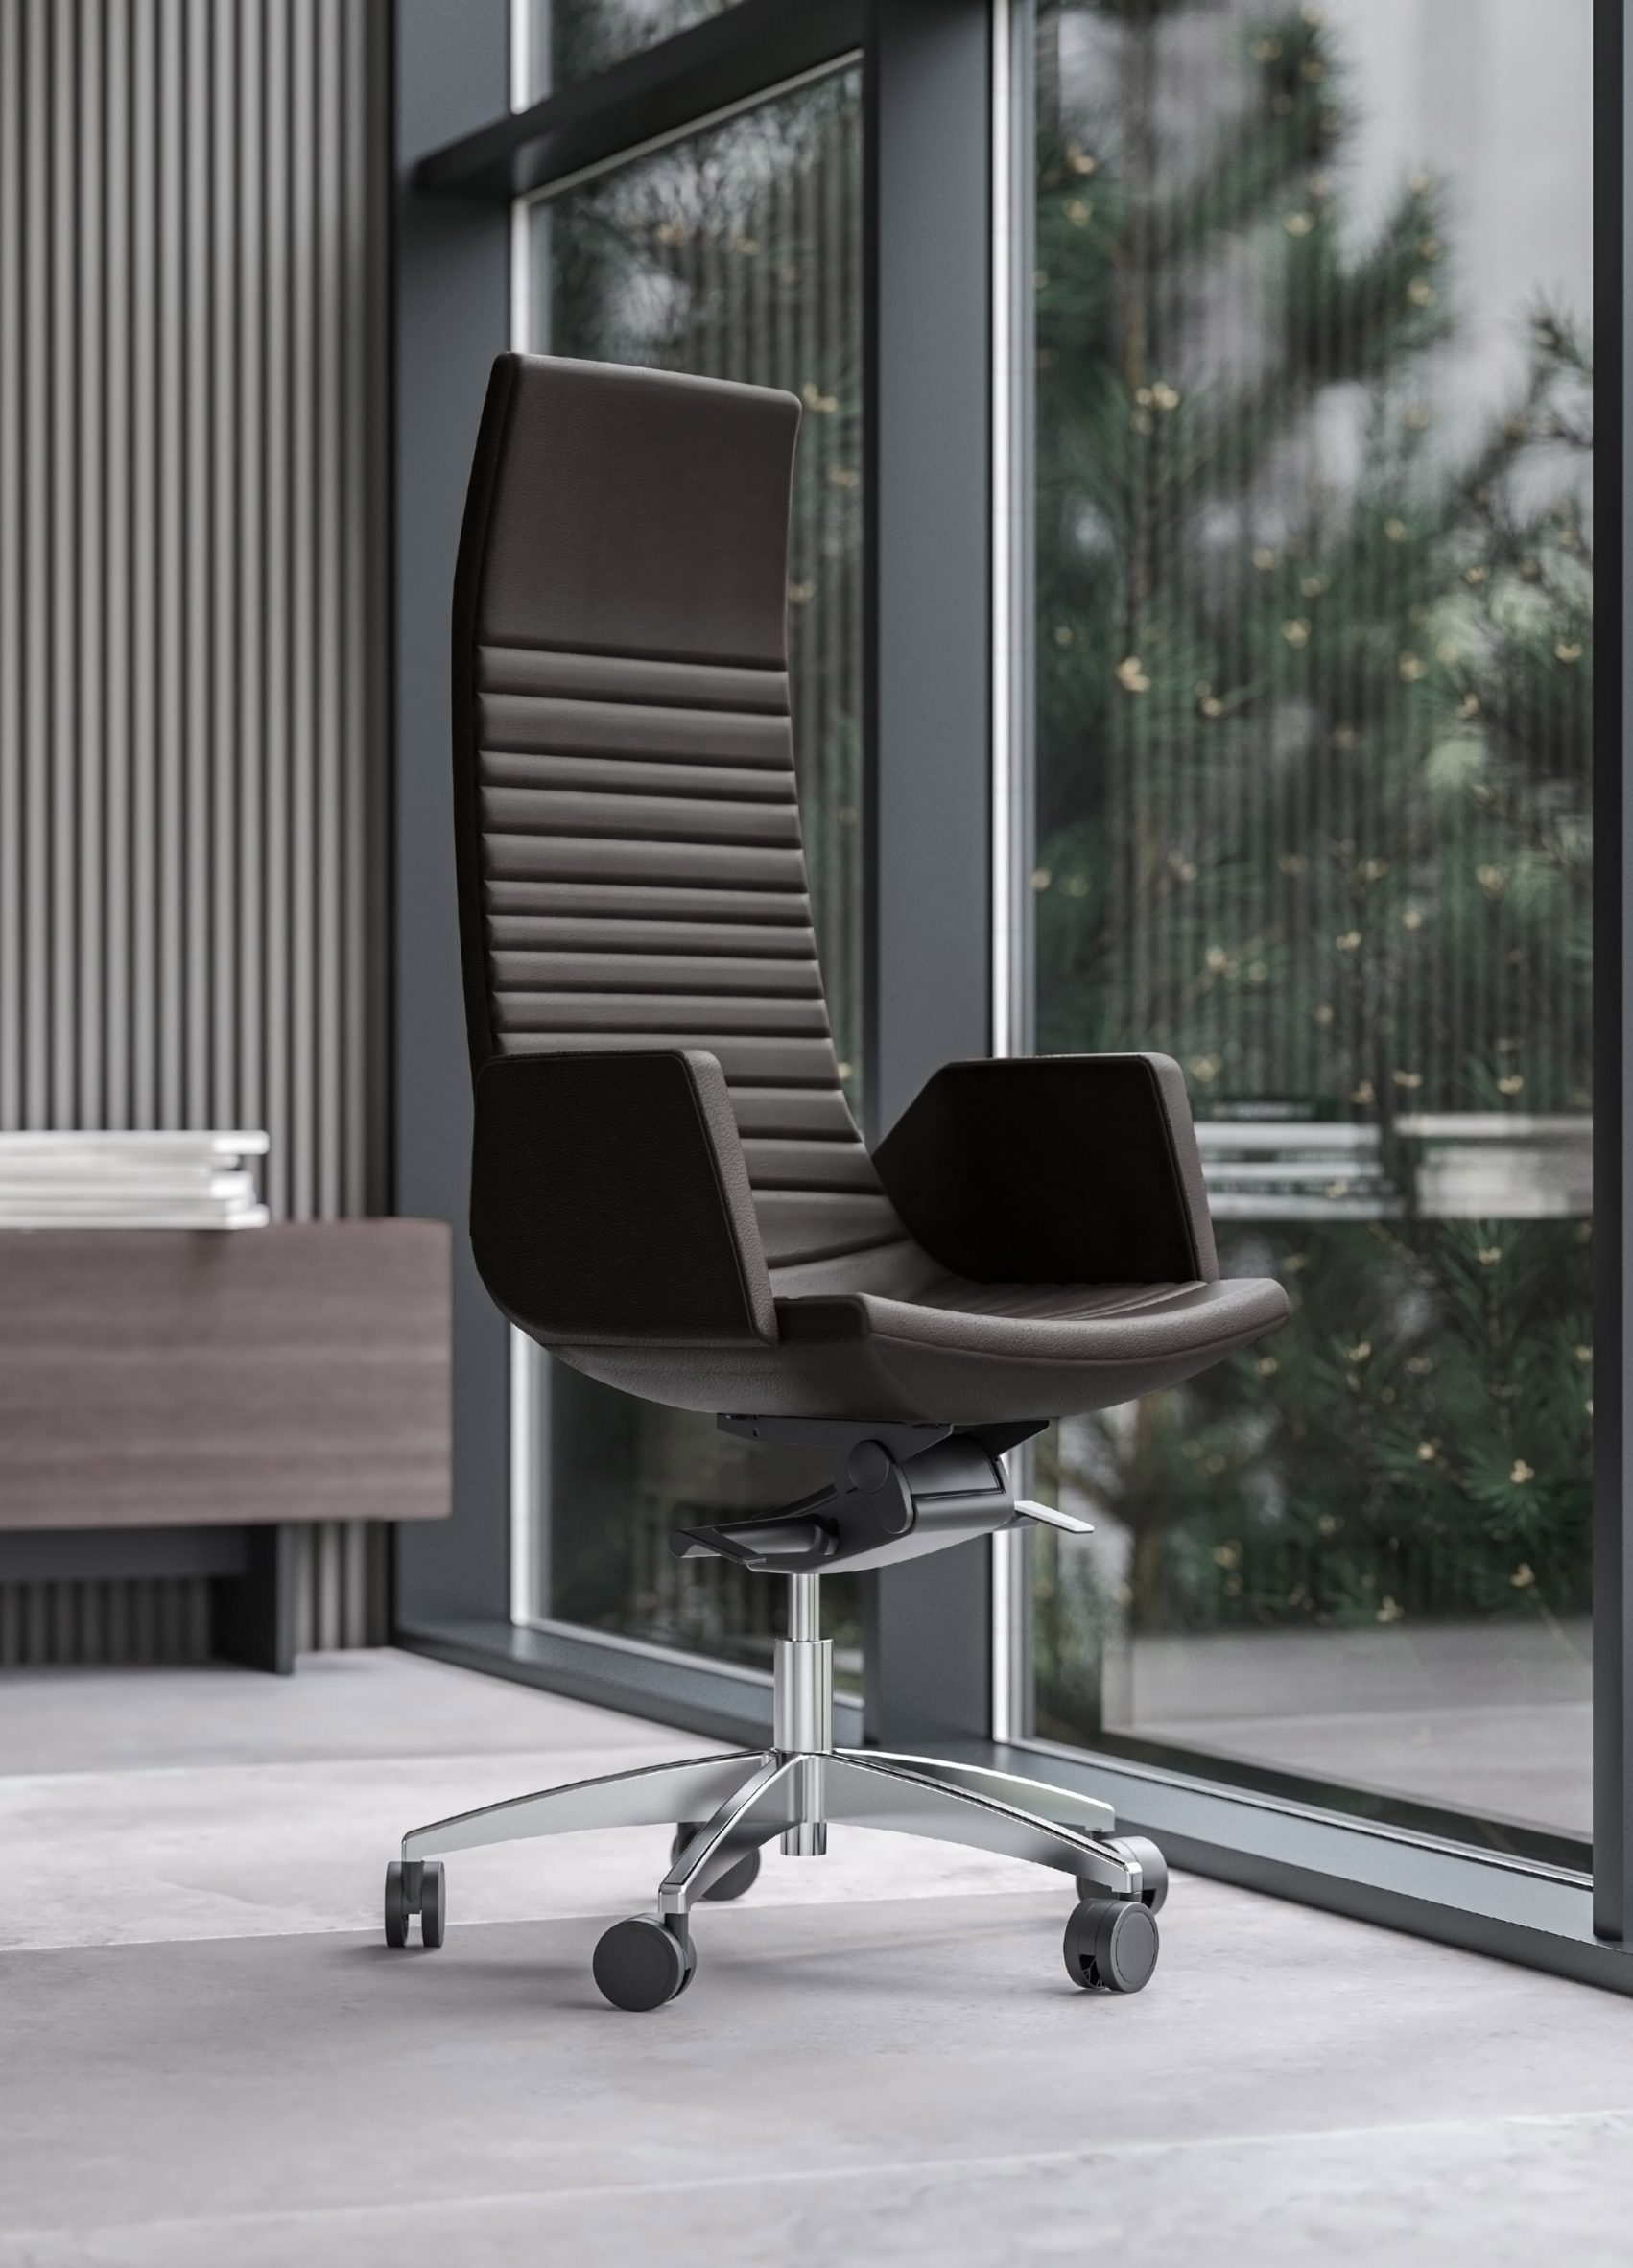 North Cape executive chair by Baldanzi & Novelli Designers for Narbutas